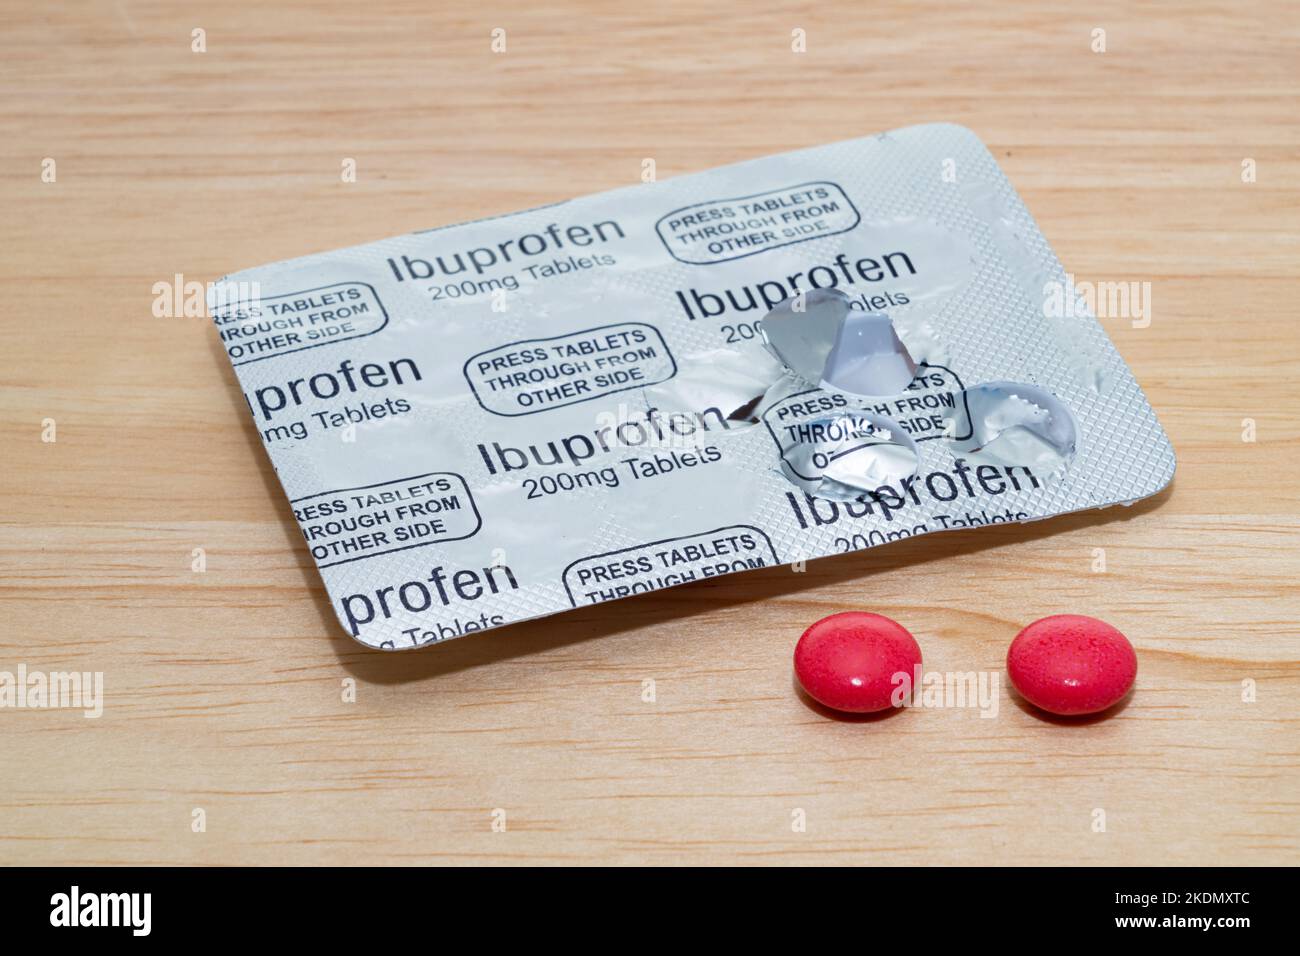 Ibuprofen blister pack with pills Stock Photo